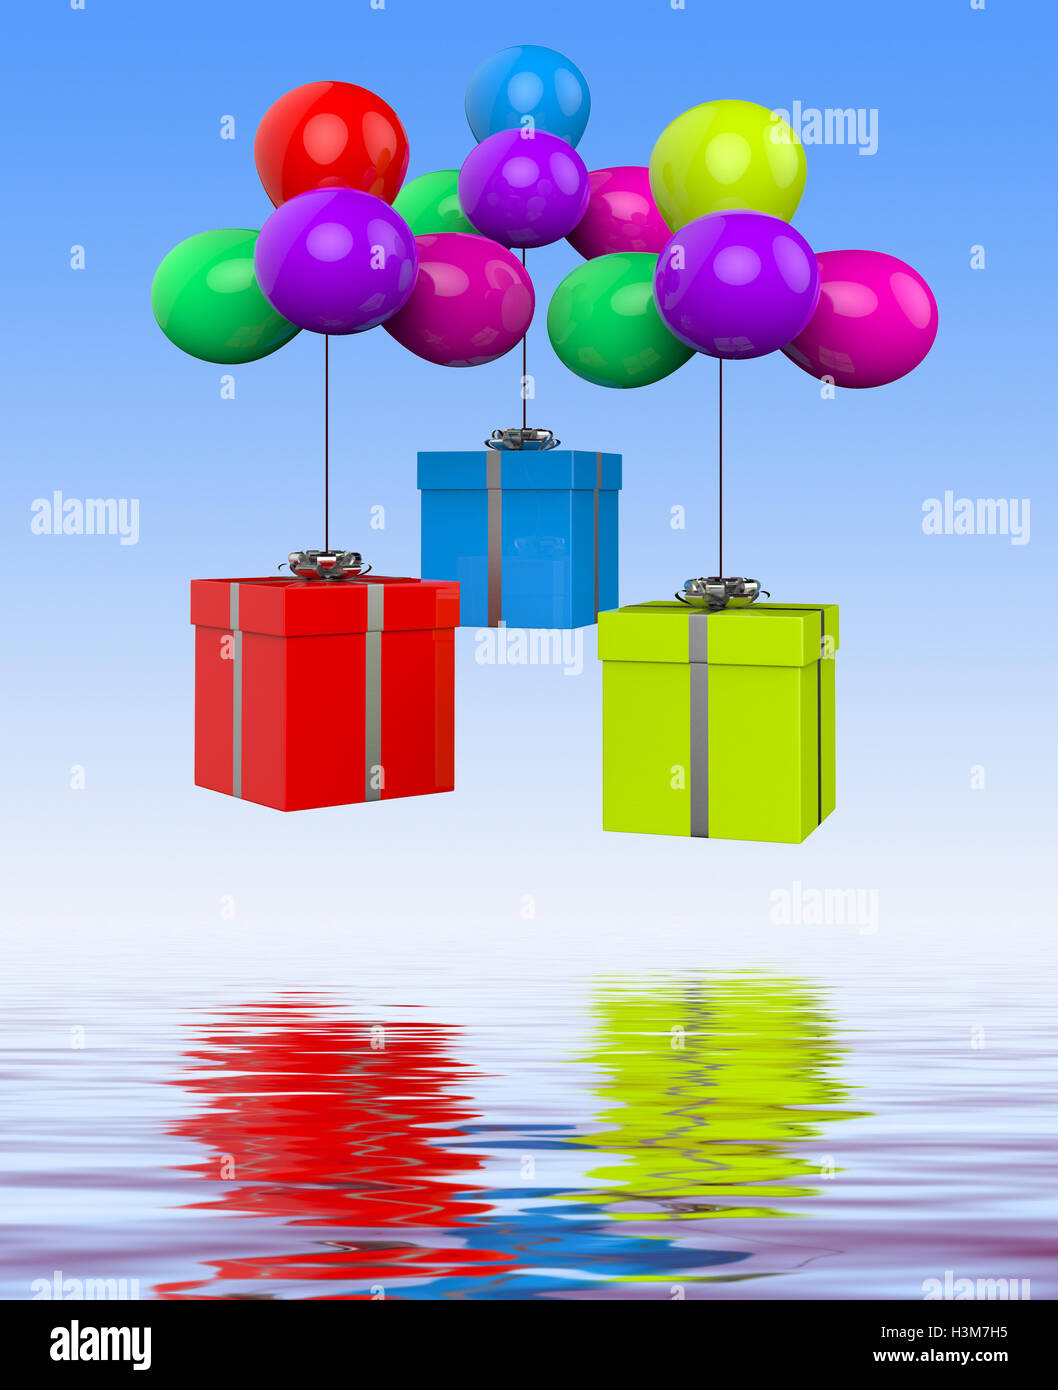 Balloons With Presents Displays Birthday Party Or Colourful Gift Stock Photo